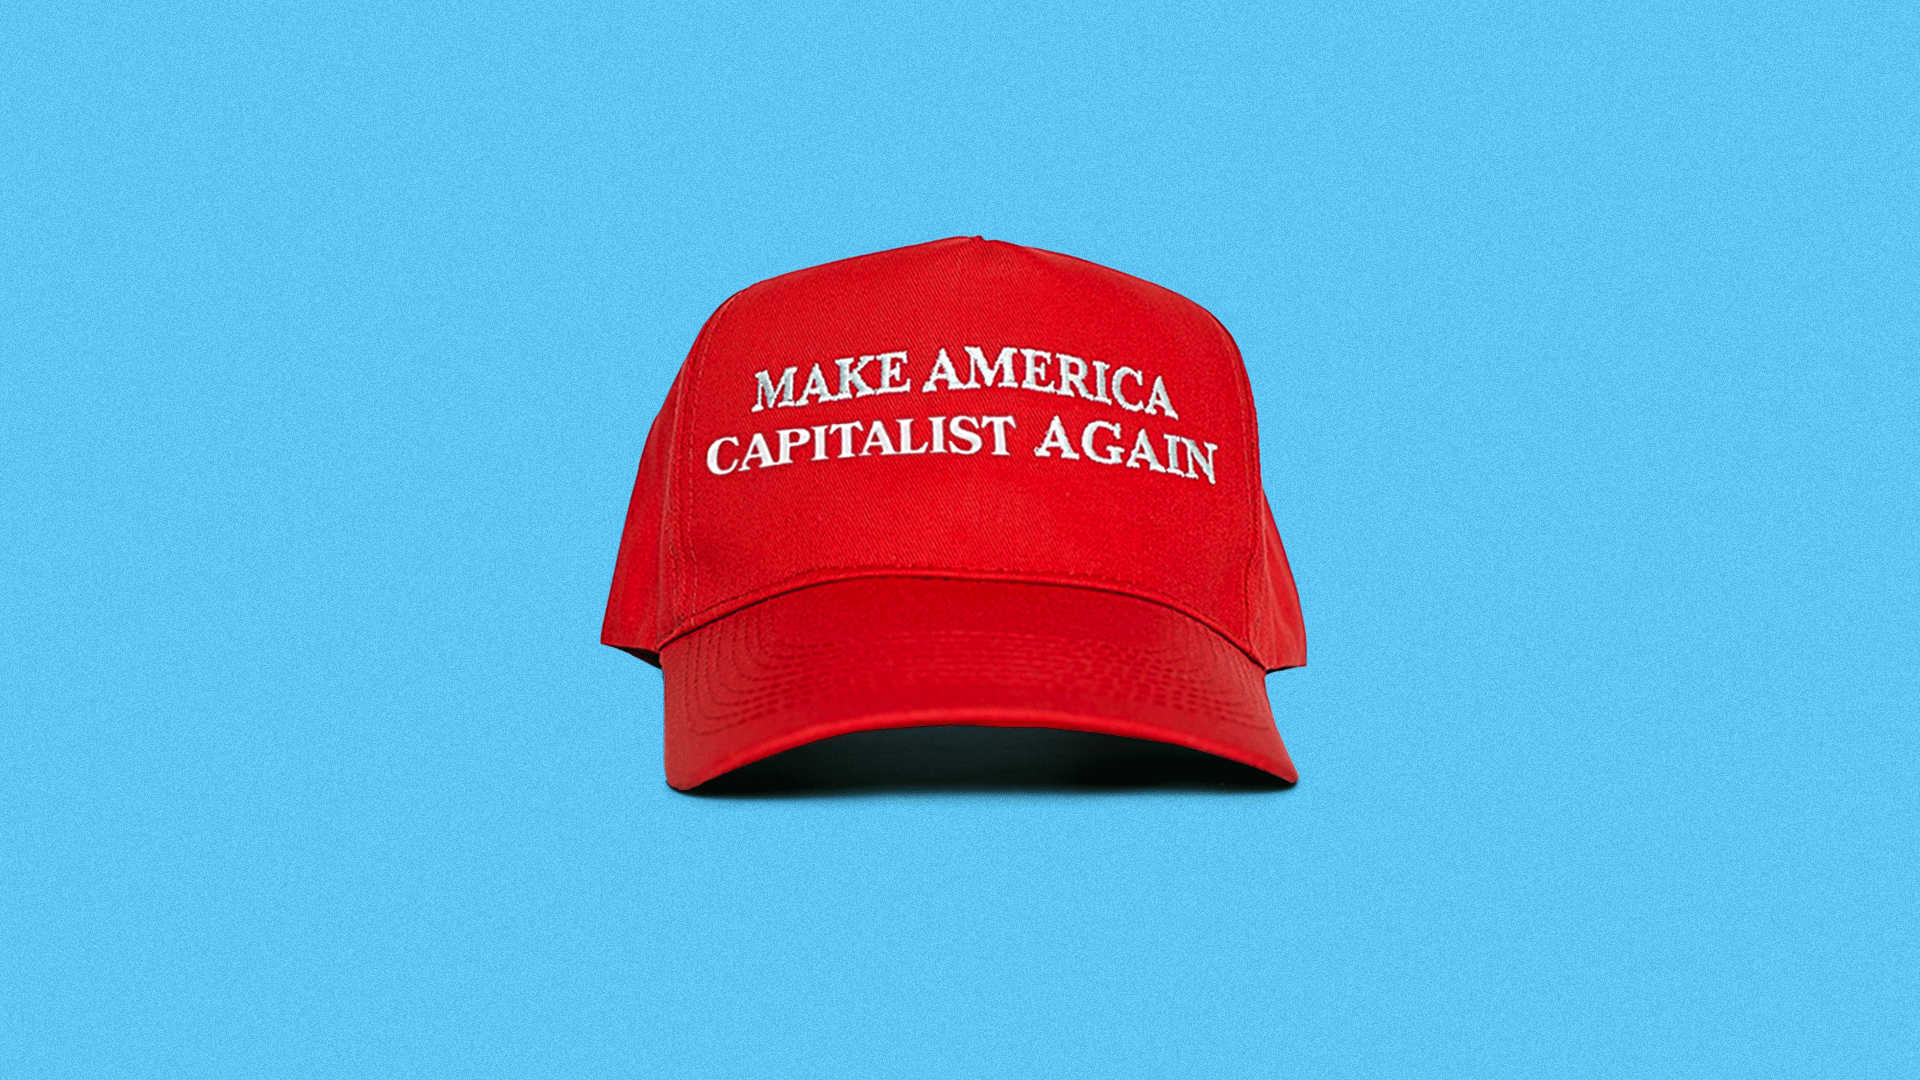 This is an illustration of a Trump hat, with "Make Capitalism Great Again" substituted for the original slogan